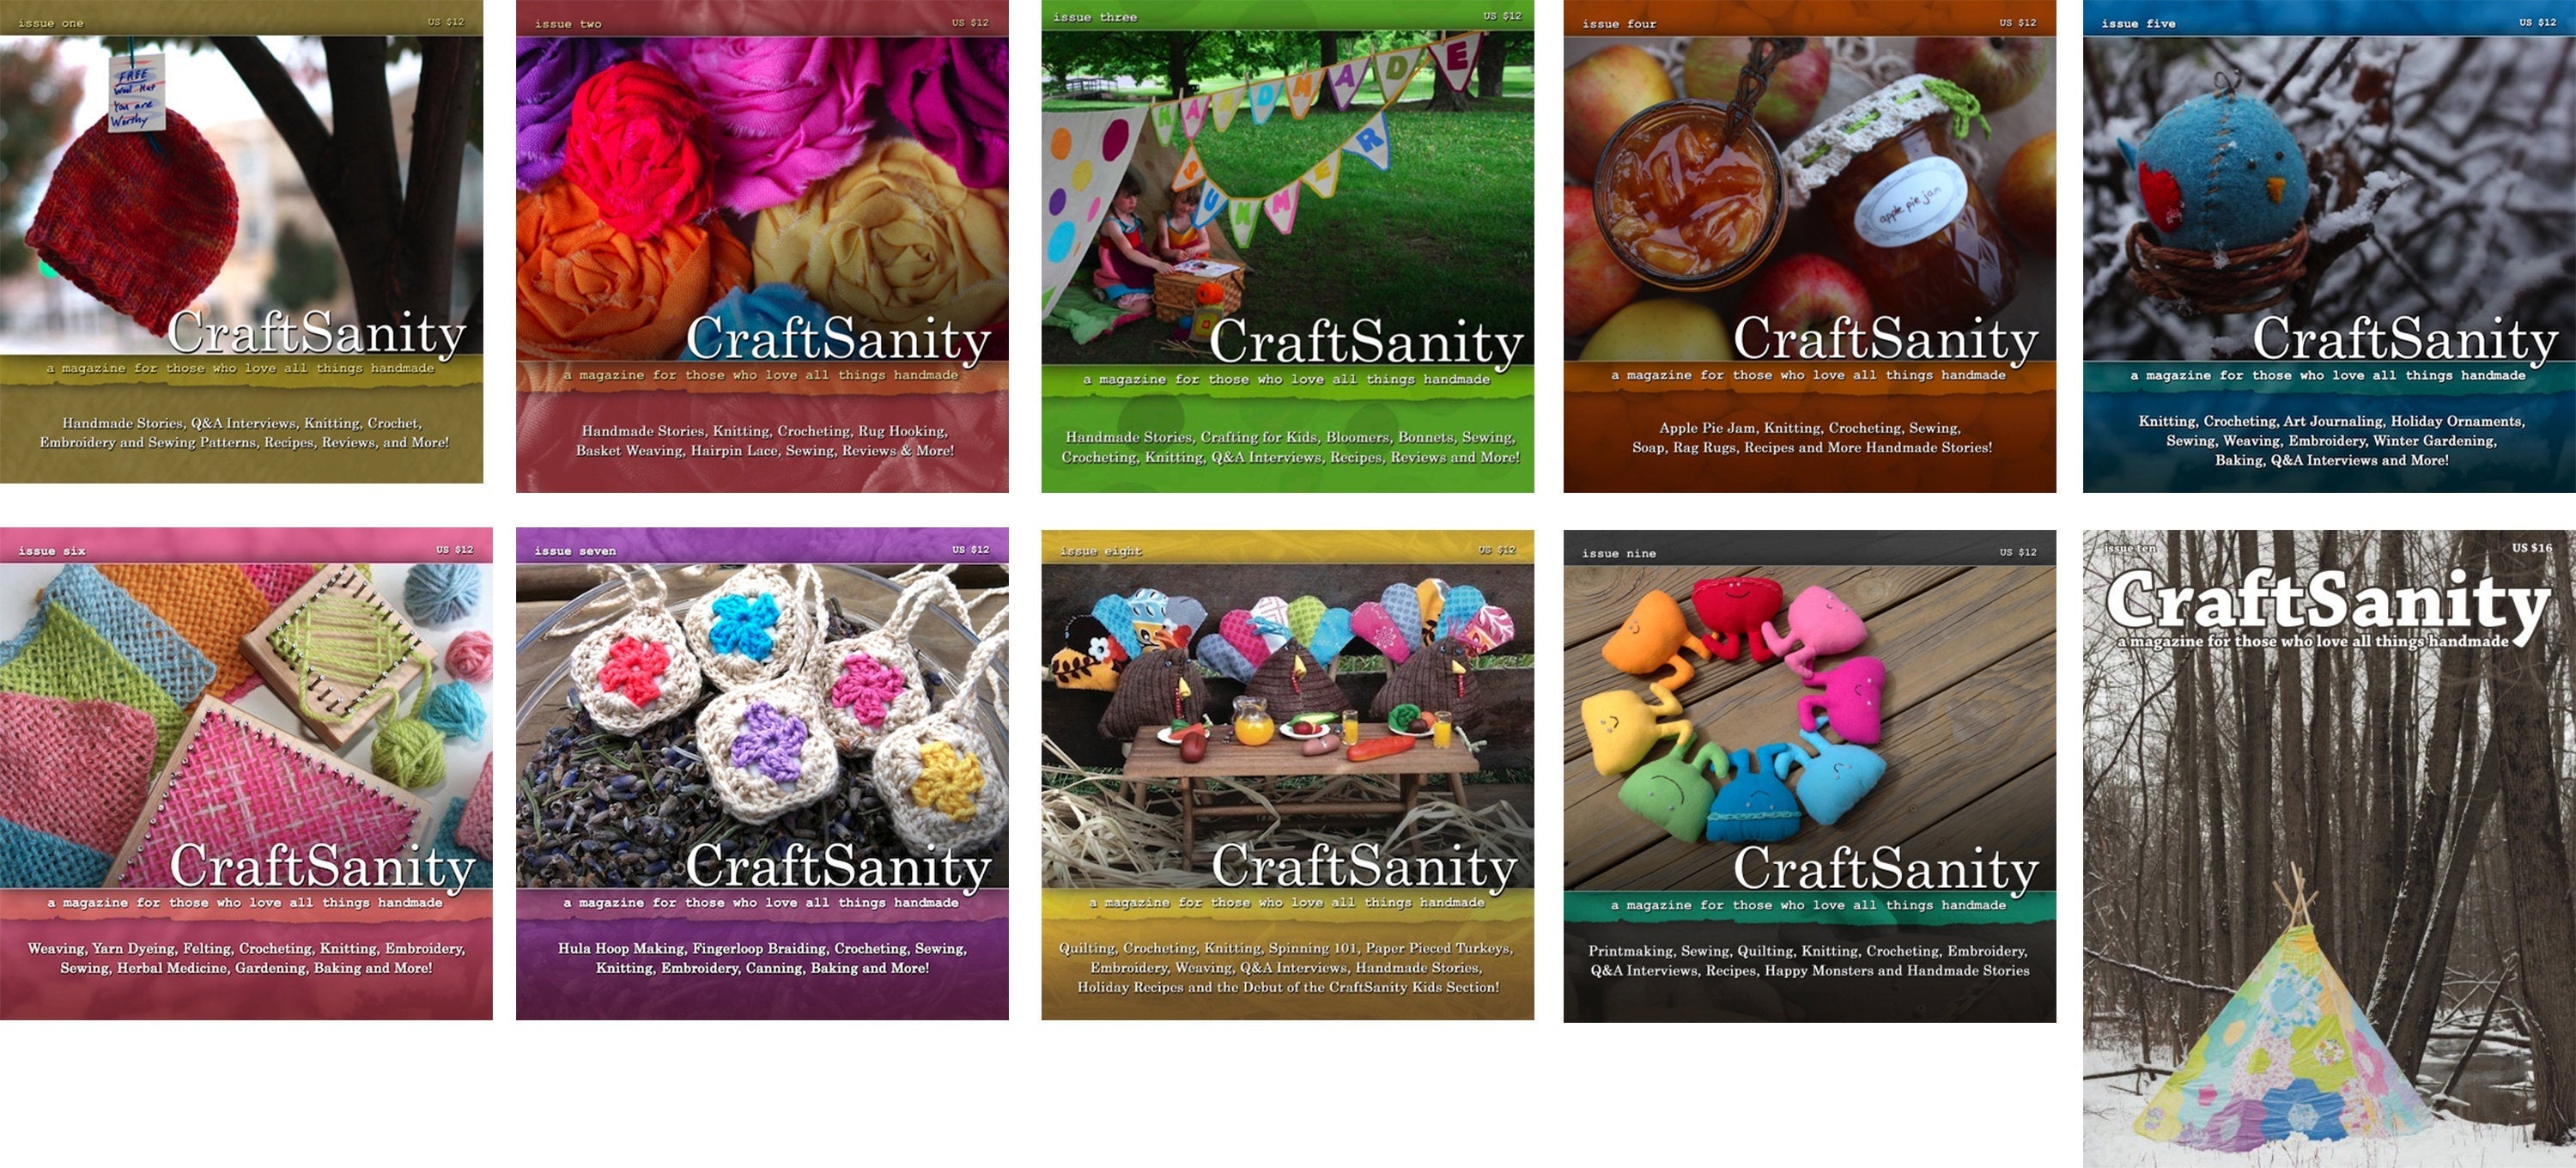 SALE! CraftSanity Magazines in Print